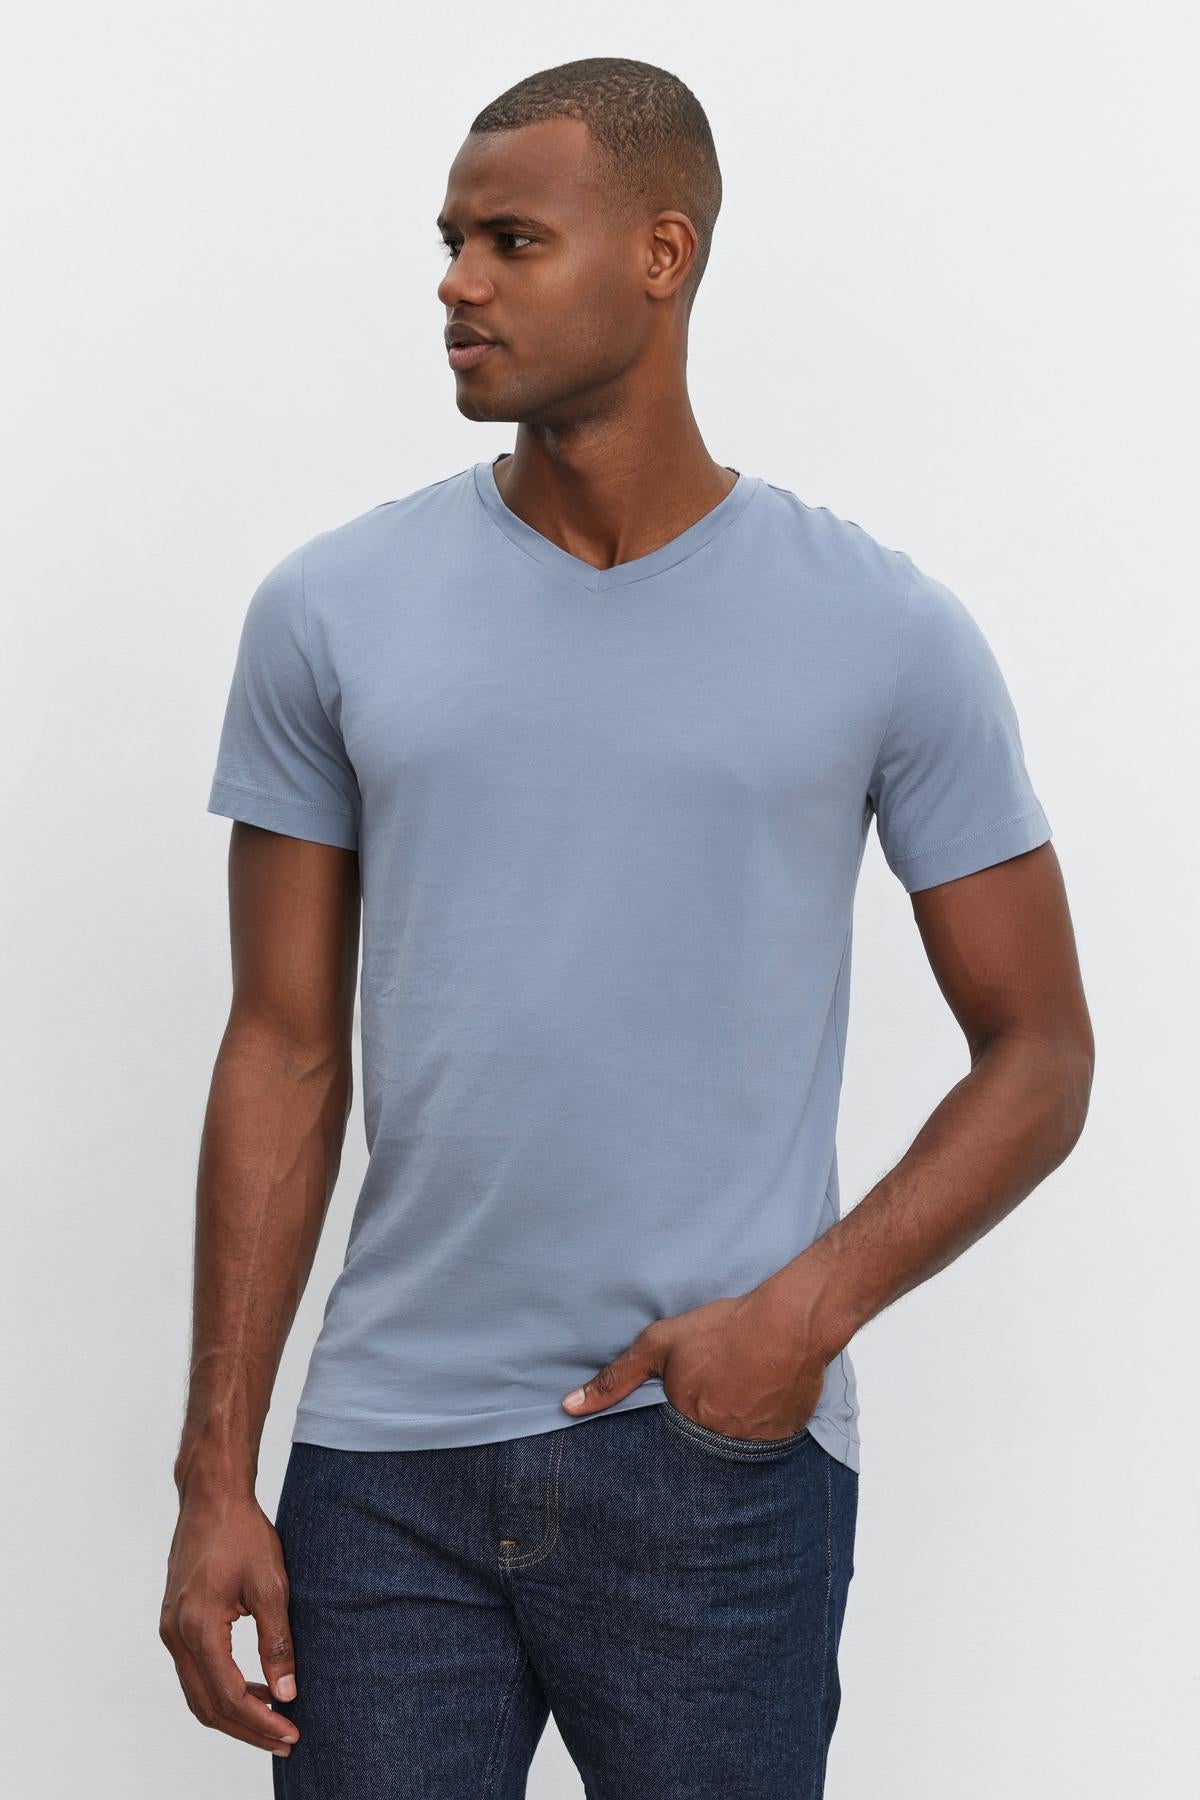 A man wearing a light blue SAMSEN TEE by Velvet by Graham & Spencer made from whisper cotton knit and dark blue jeans stands against a plain white background, looking to his left.-37386148774081